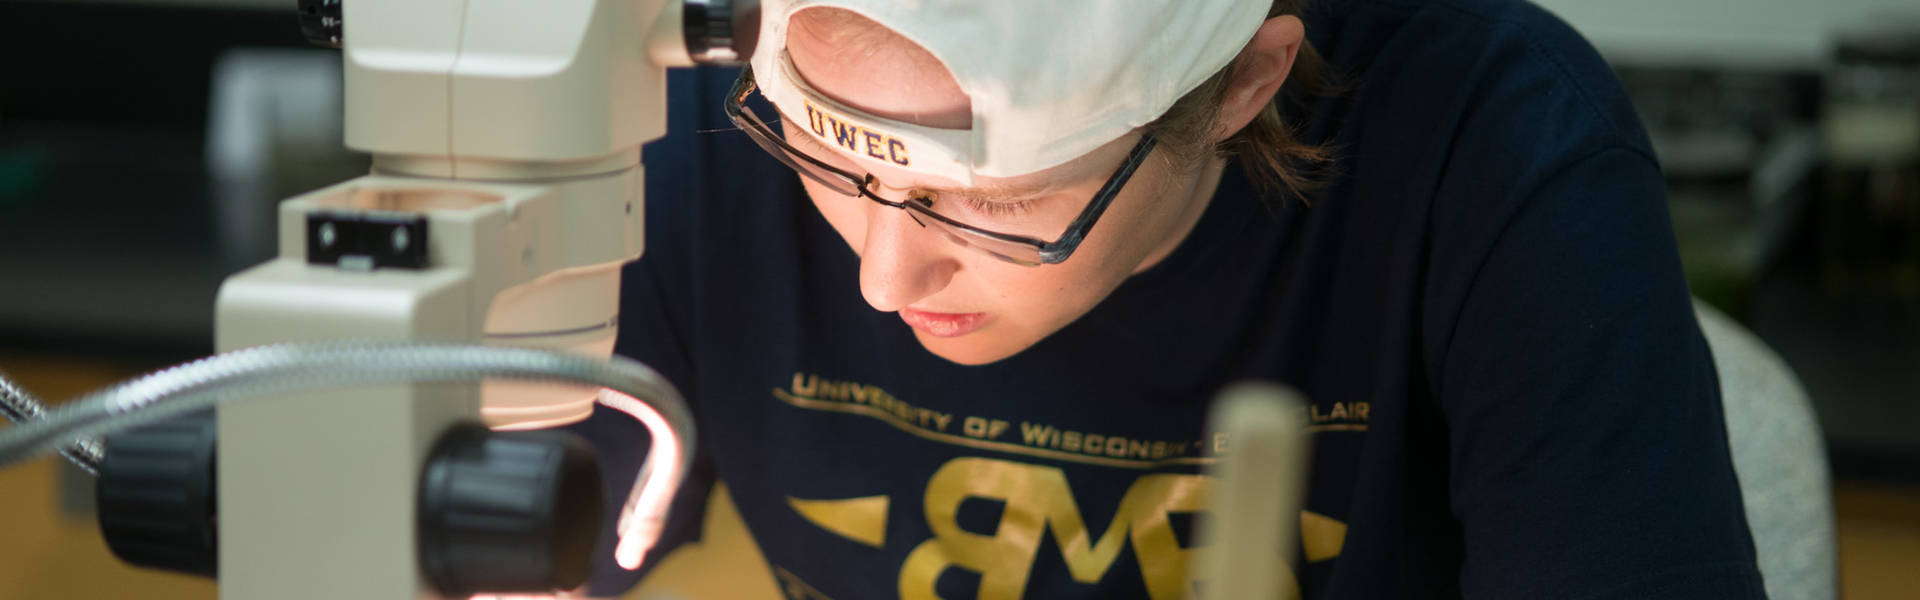 UWEC professor and student working in materials science lab